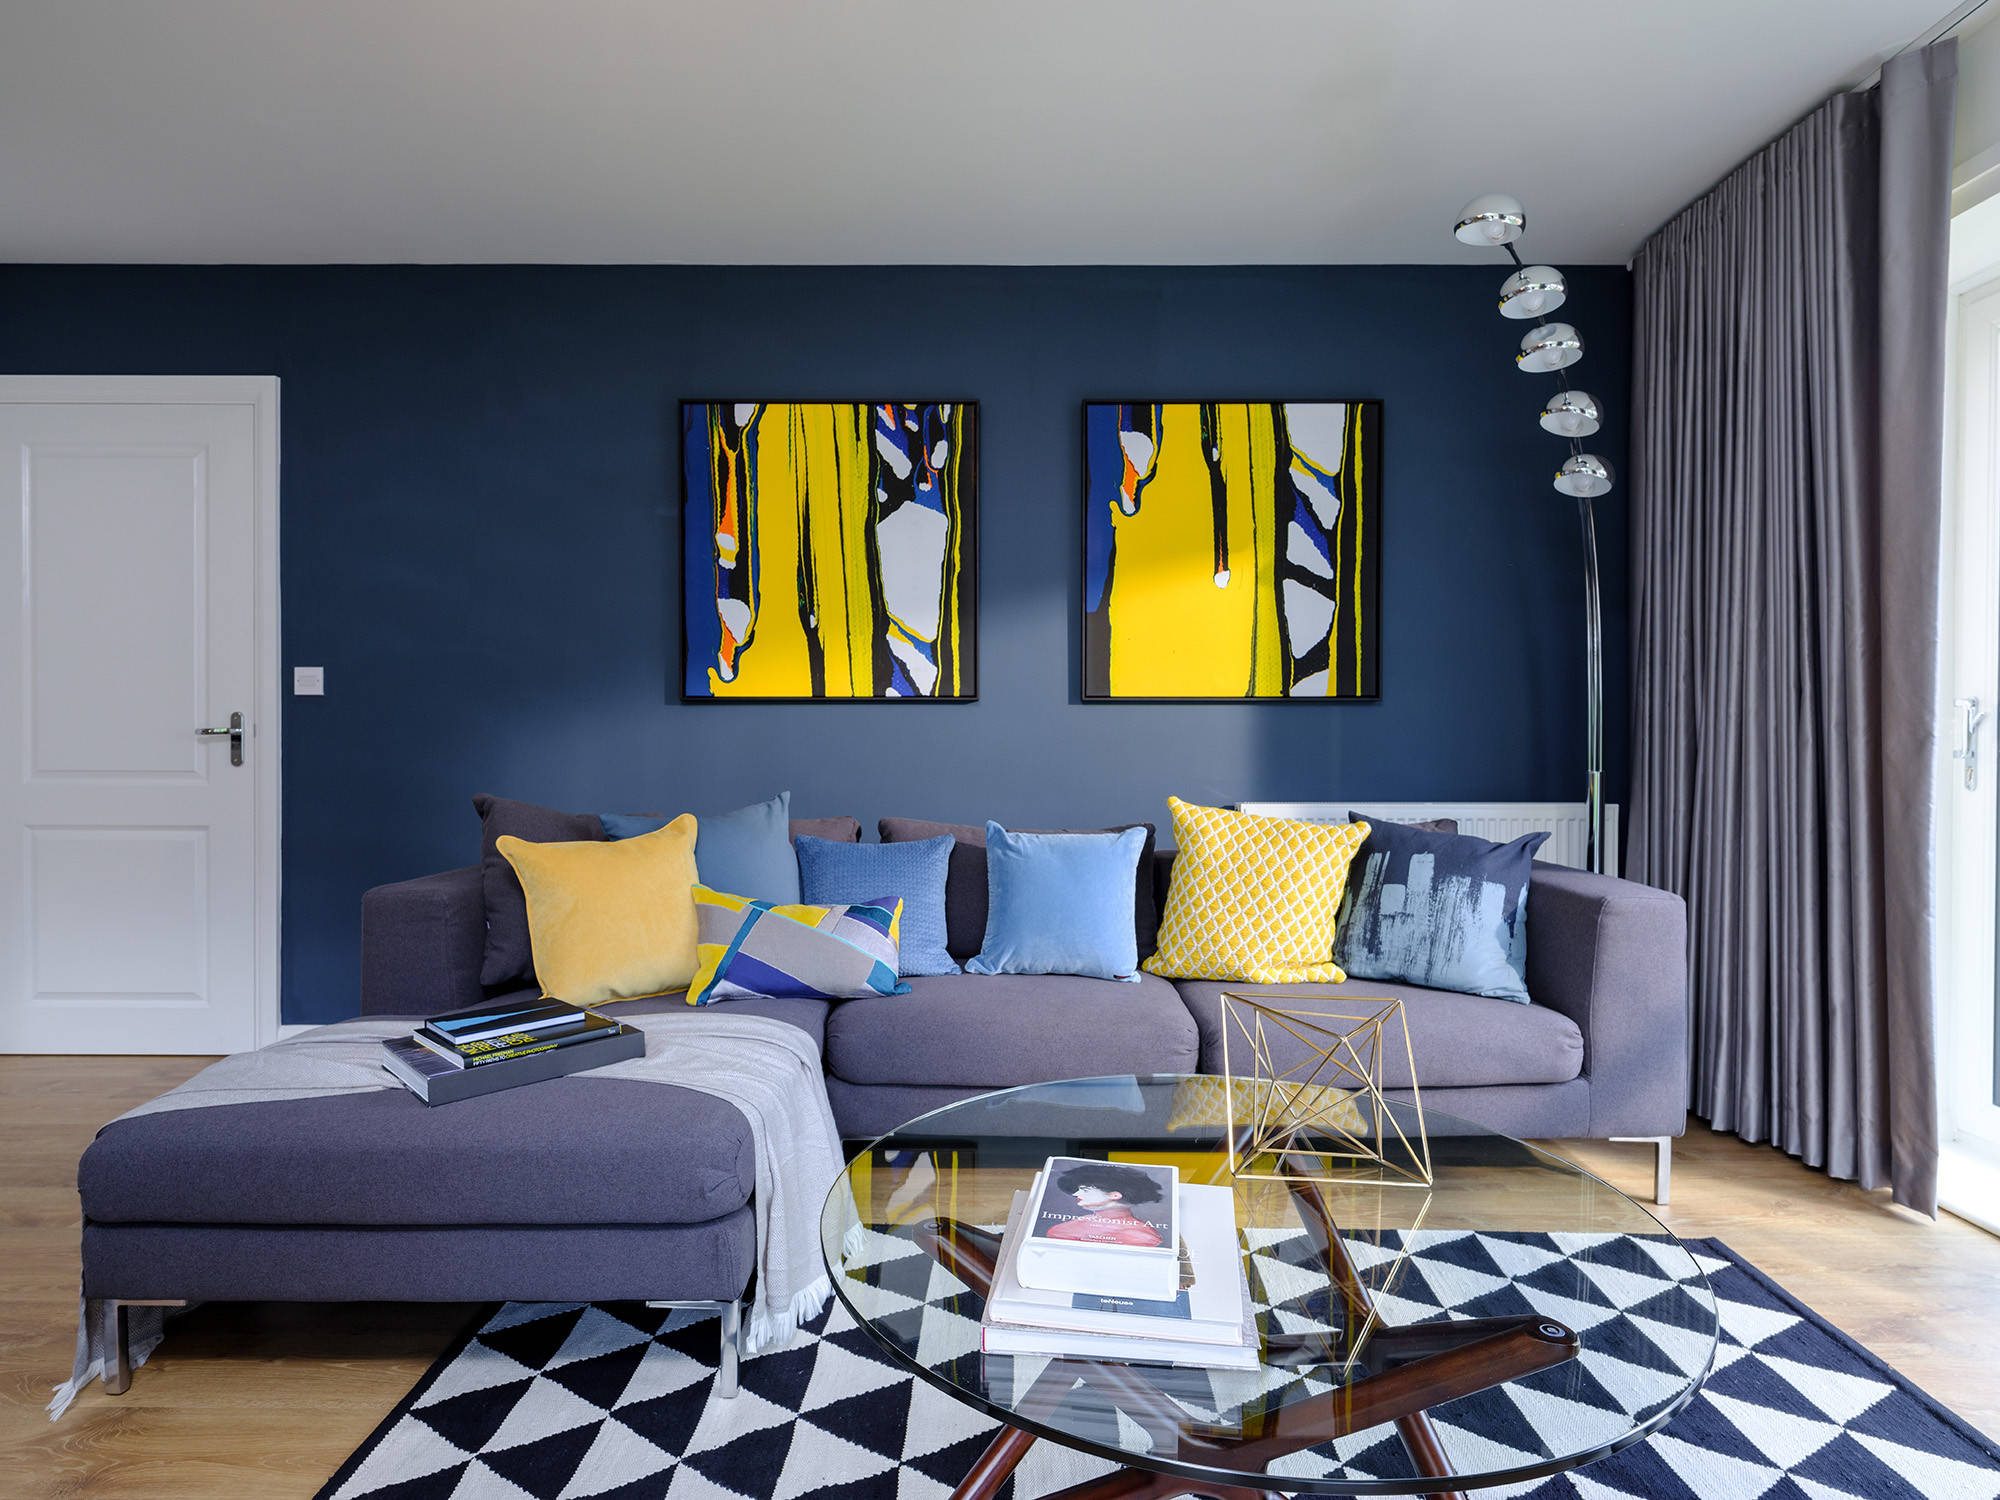 Will these Blue Sofa Ideas Tempt You to Ditch the Grey? | Houzz UK